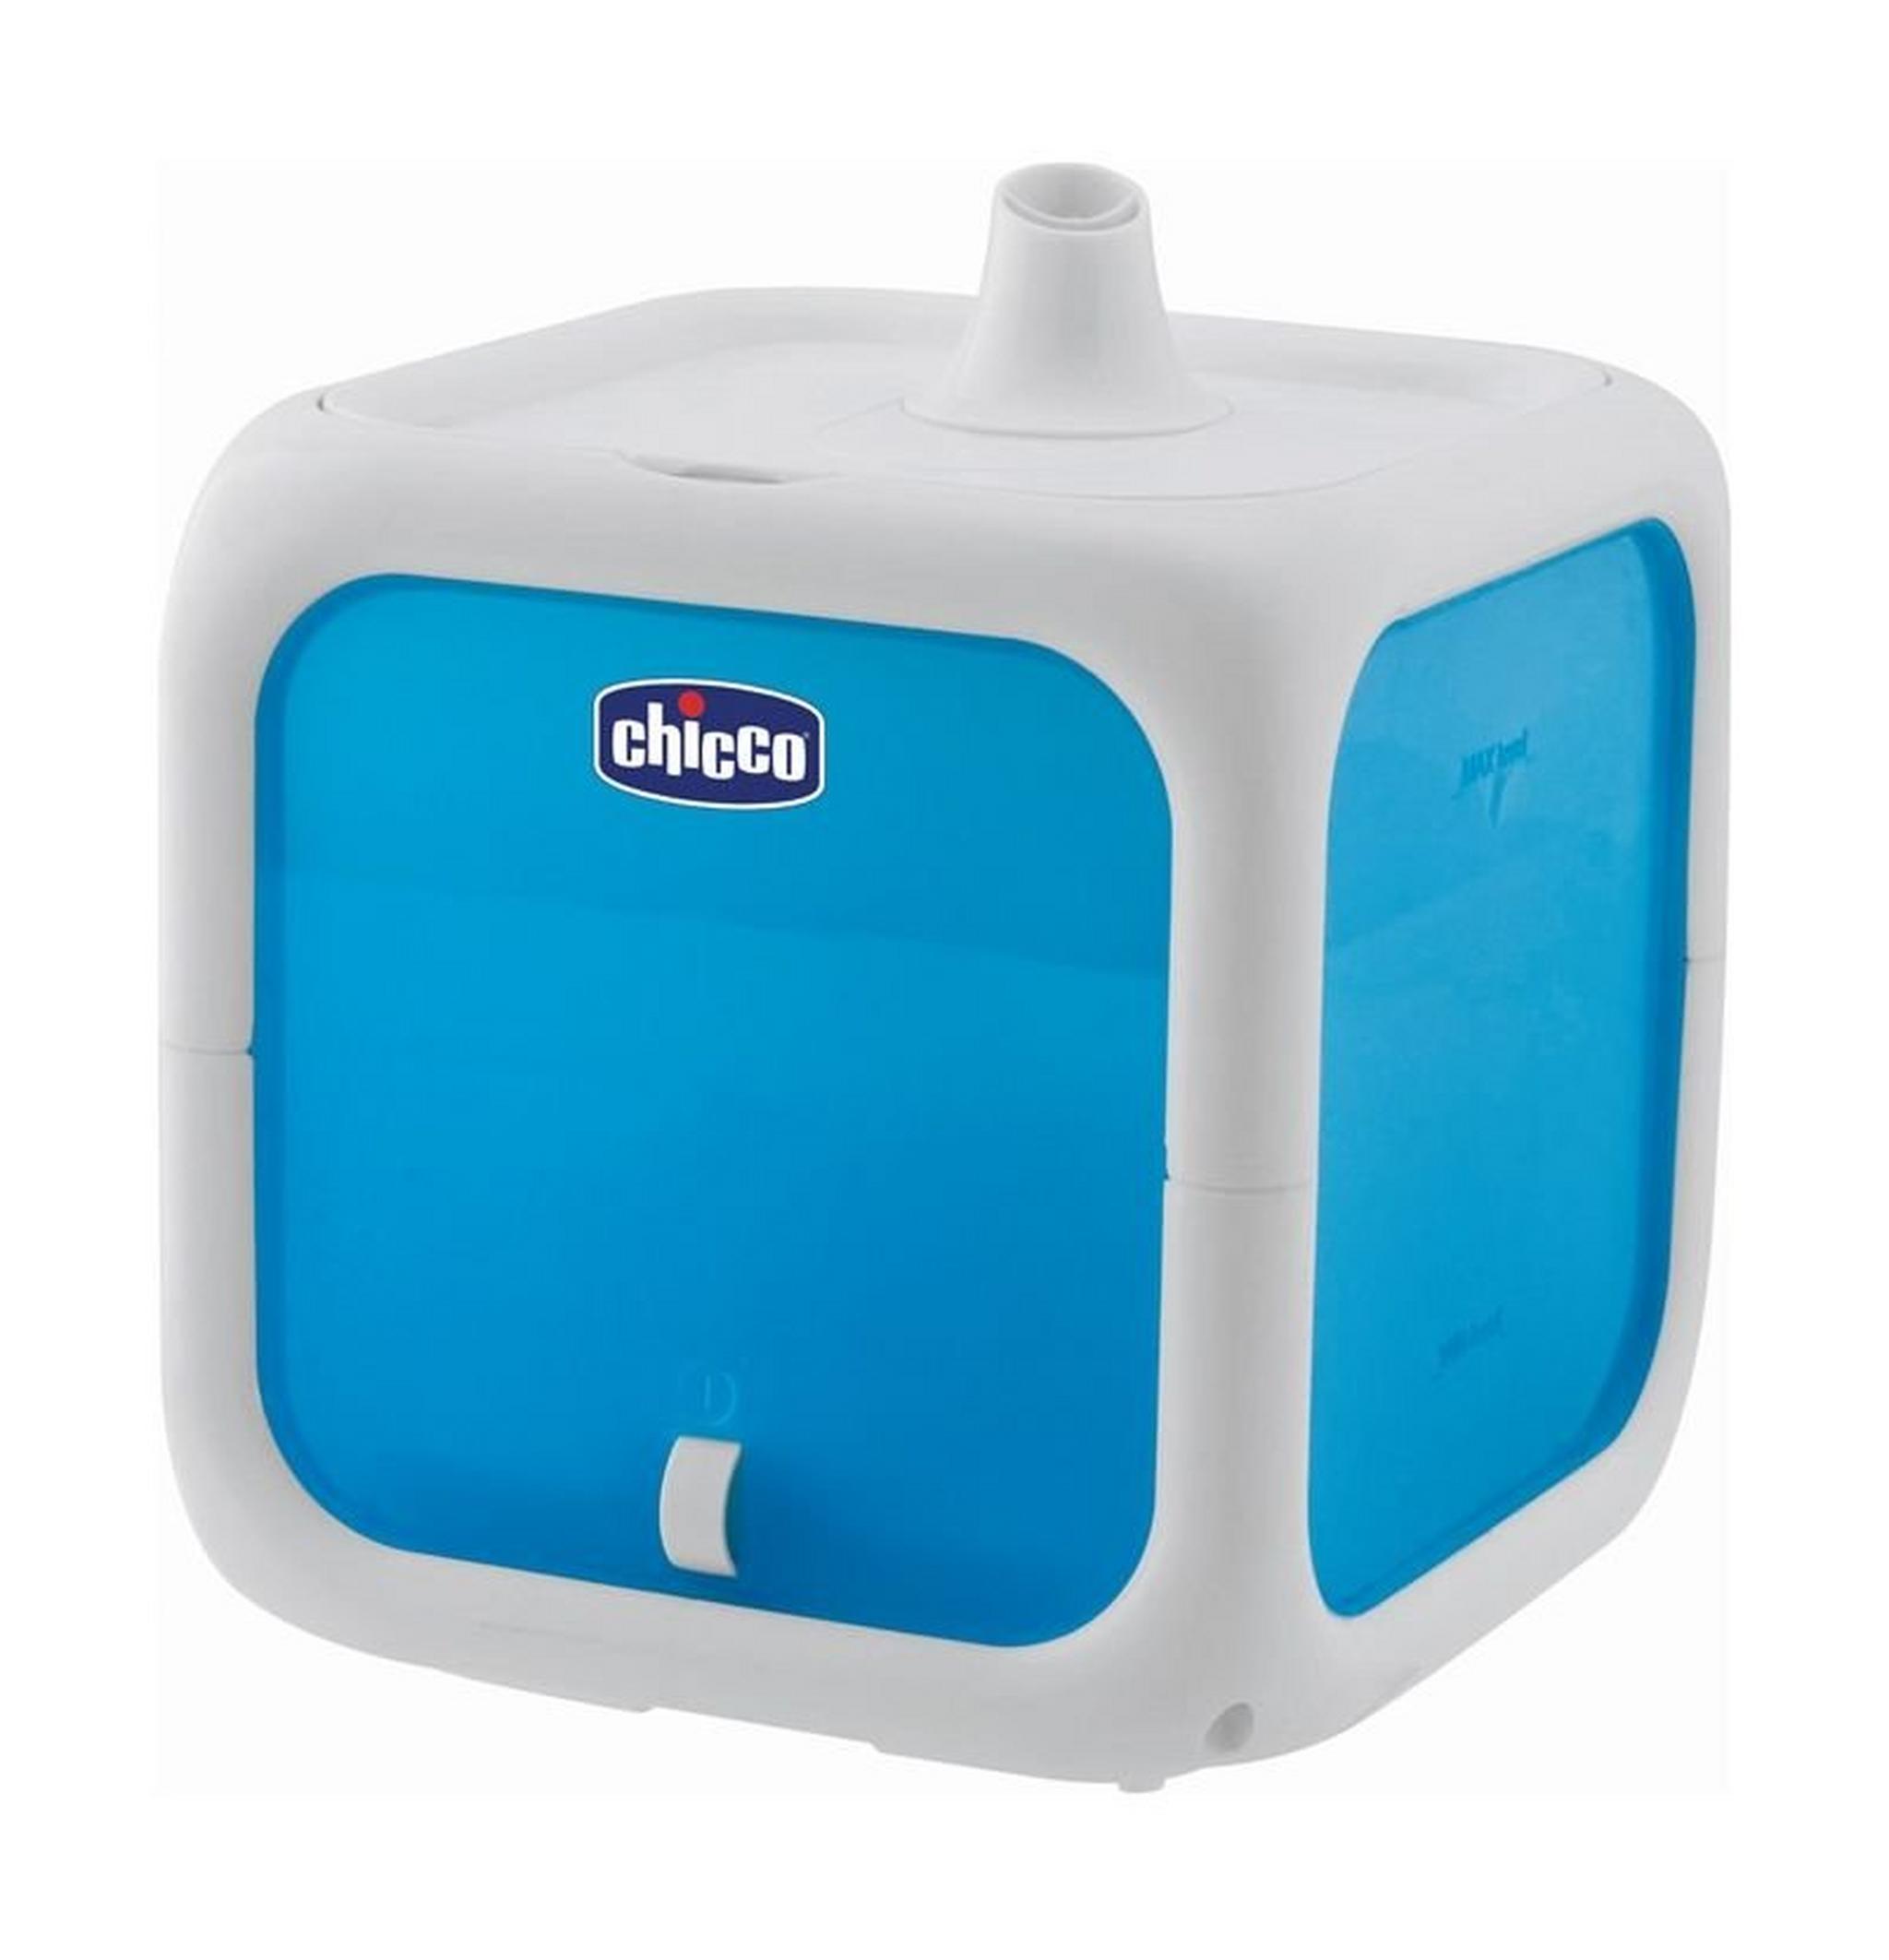 Chicco Humi Relax Hot Humidifier For Babies (CHCN-000068)